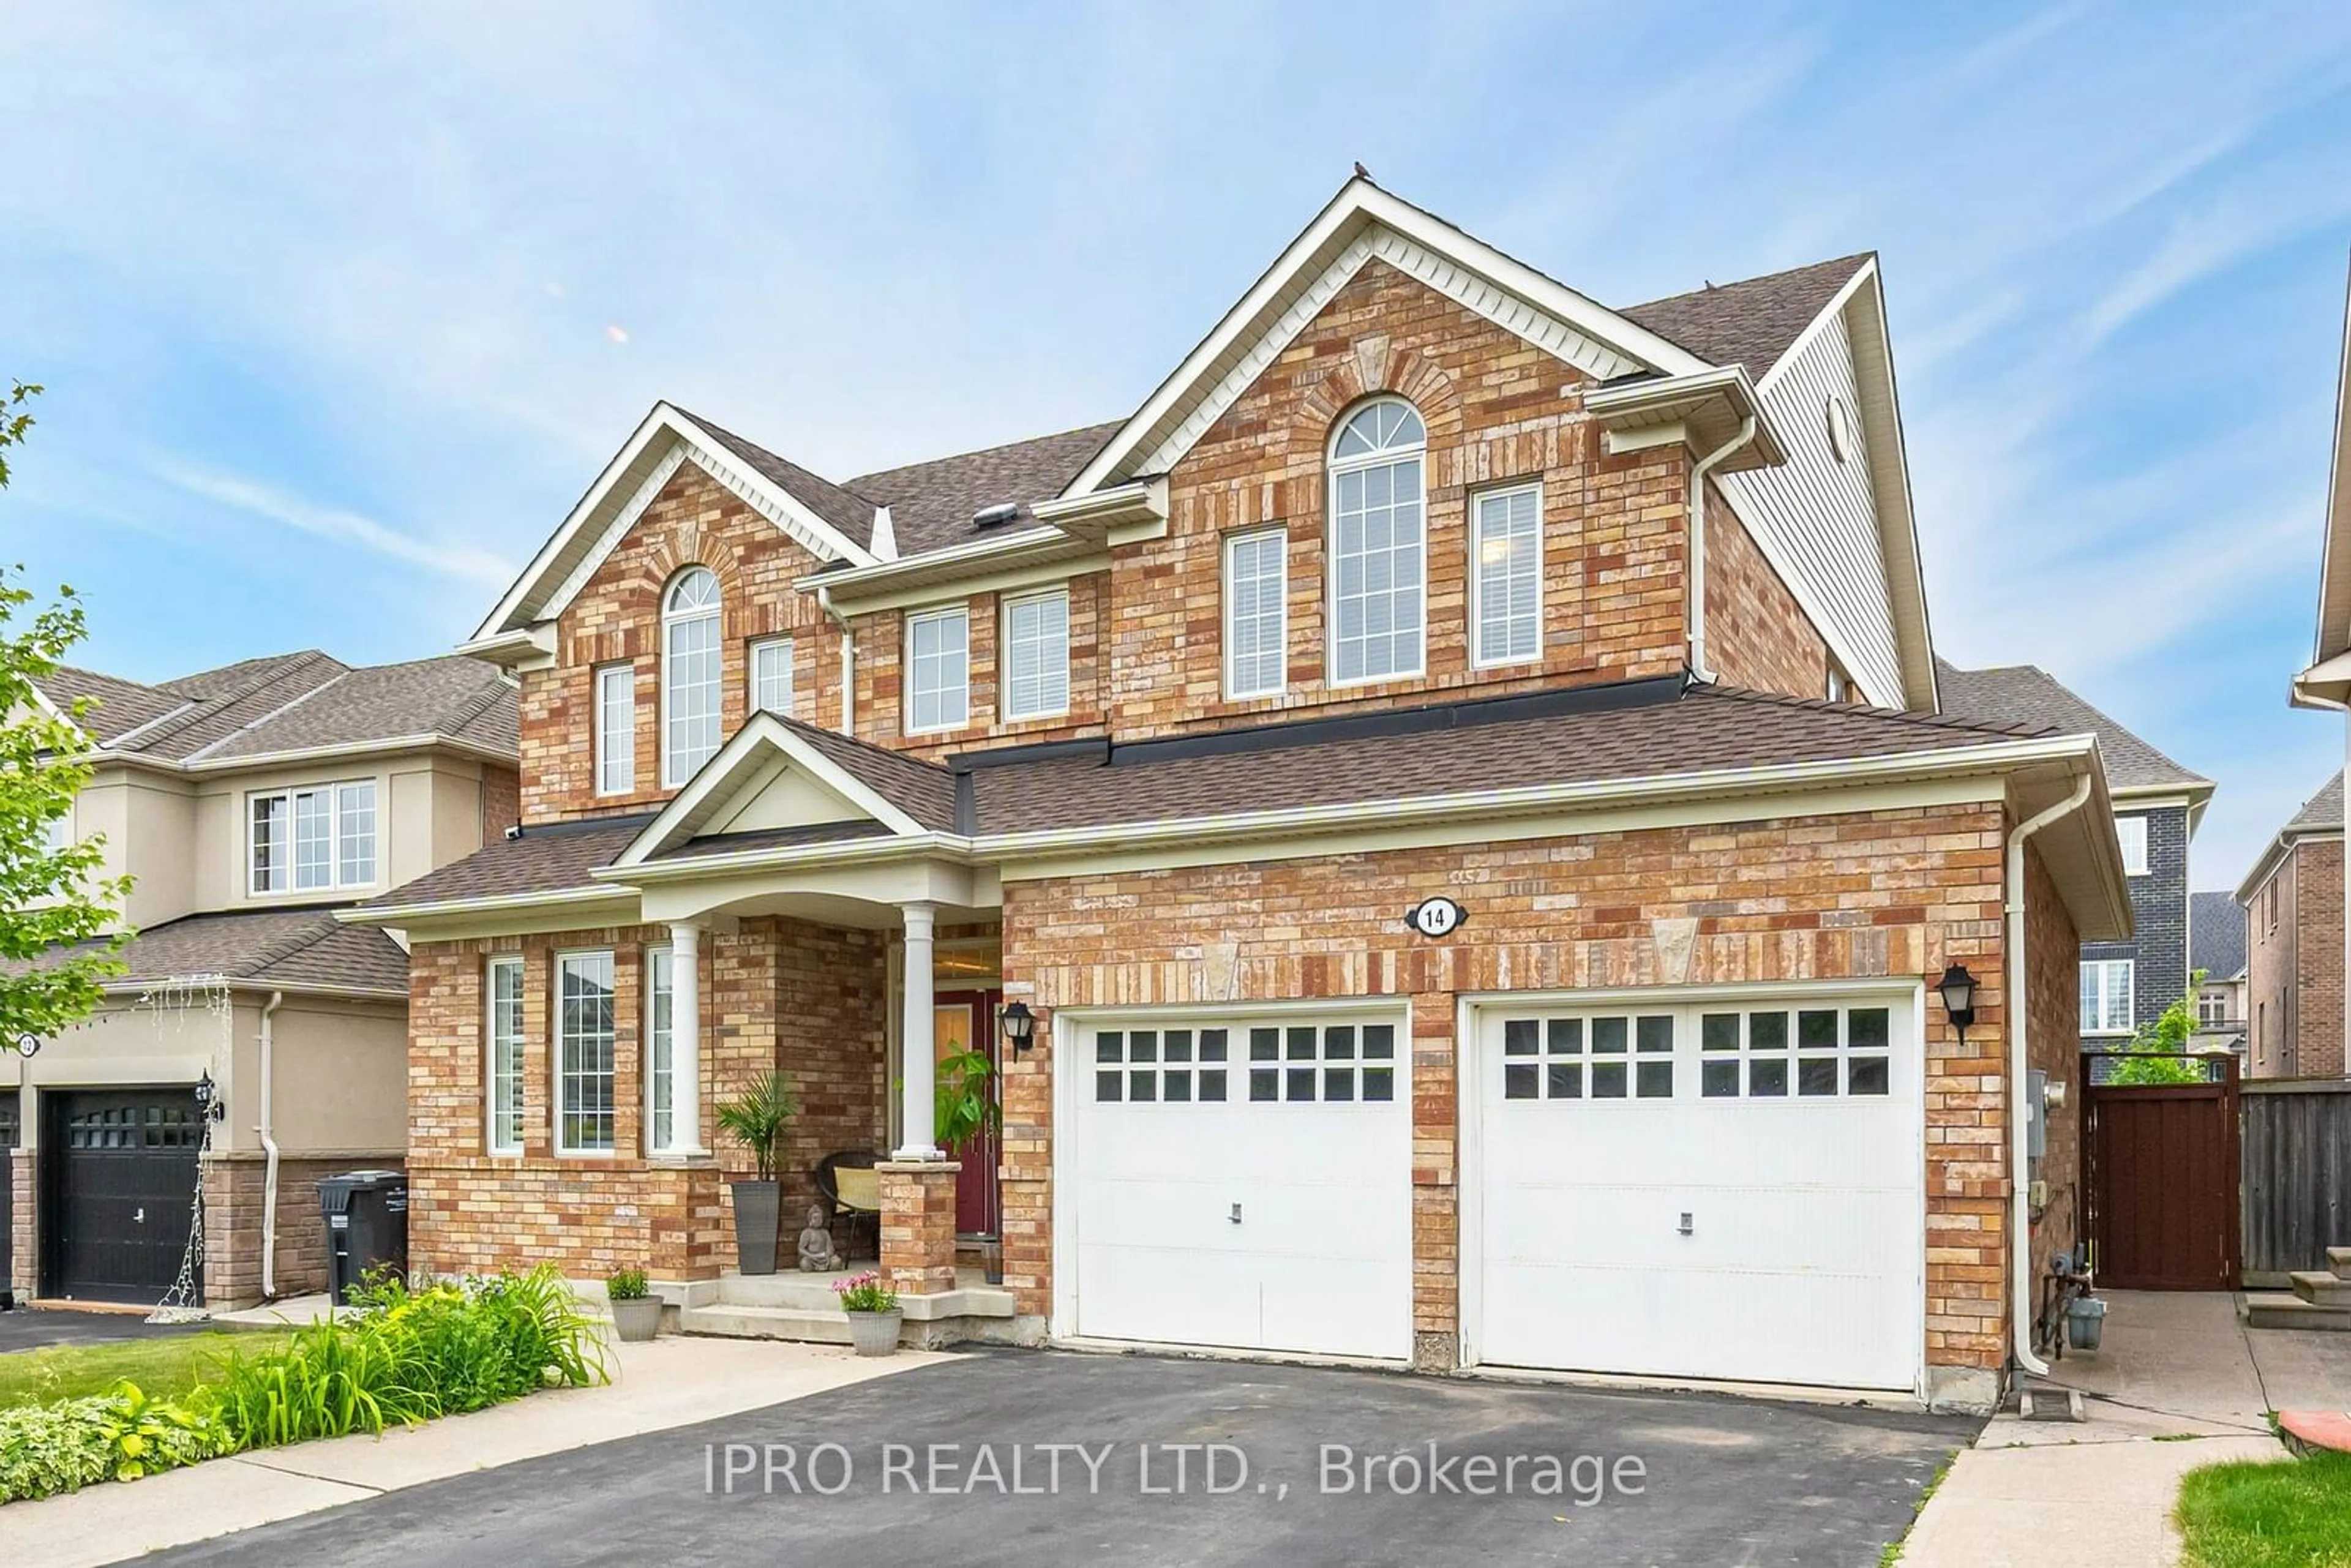 Home with brick exterior material for 14 Valleywest Rd, Brampton Ontario L6P 2J9